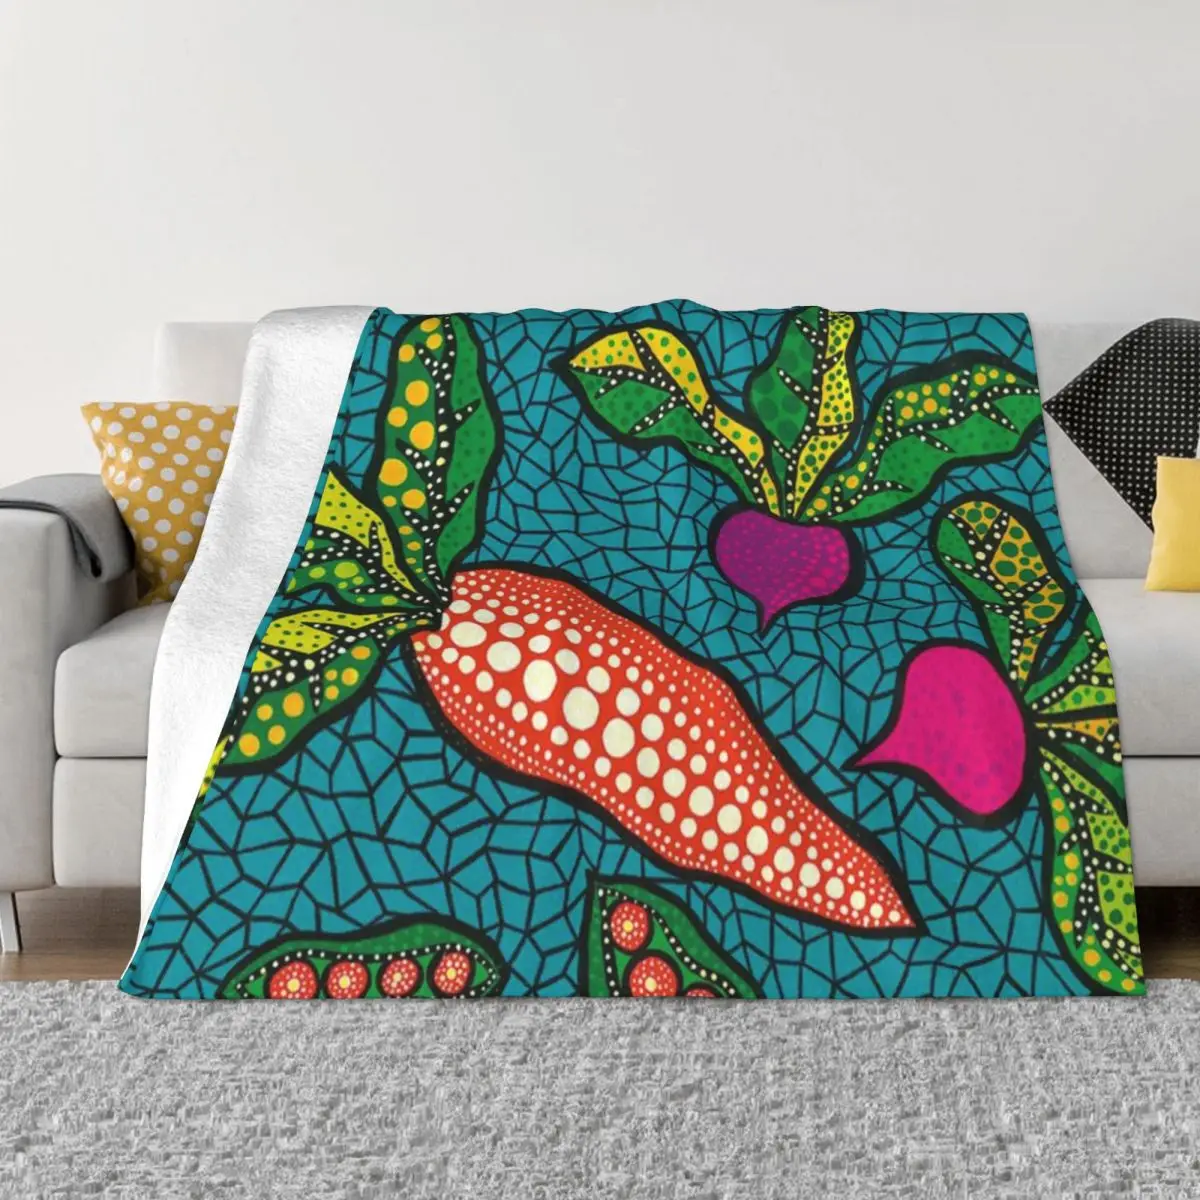 

3D Print Yayoi Kusama Blankets Breathable Soft Flannel Autumn Abstract Art Throw Blanket for Couch Home Bedding